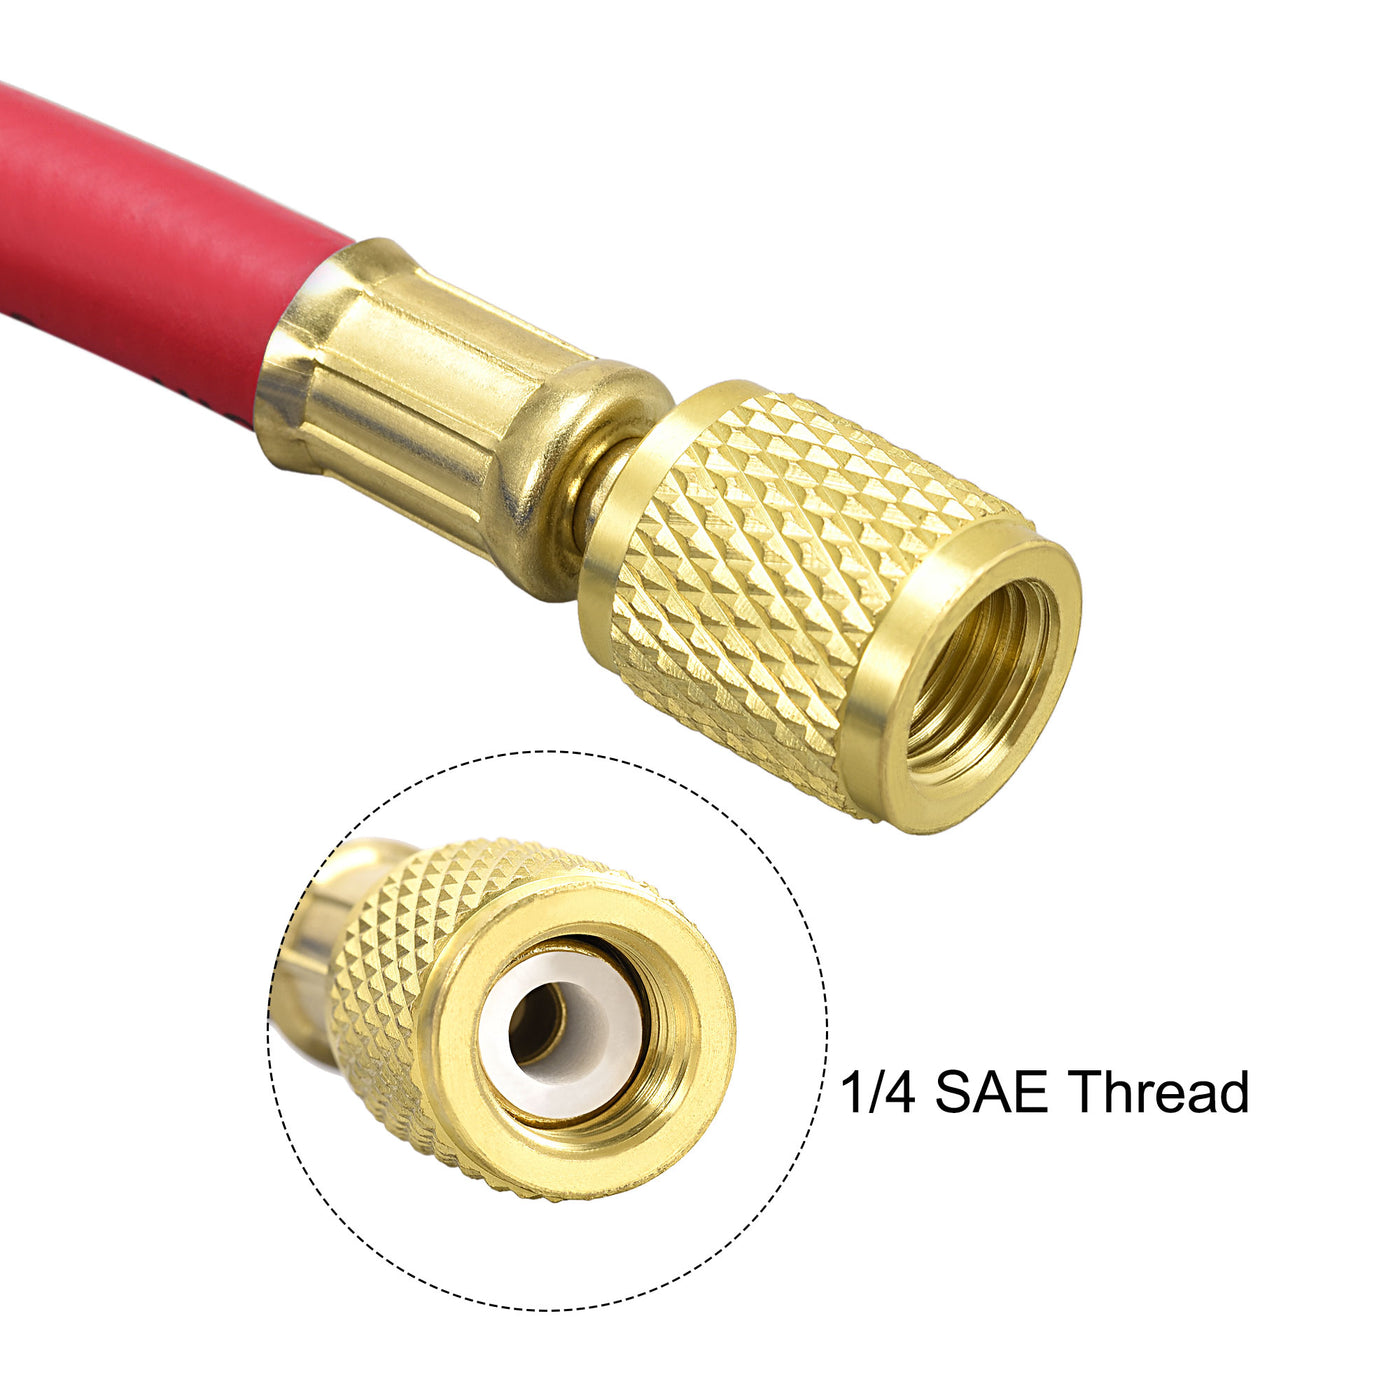 uxcell Uxcell Refrigerant Charging Hose, Copper Plating Thread, for Automotive or HVAC Home Air Conditioner Refrigeration Maintenance